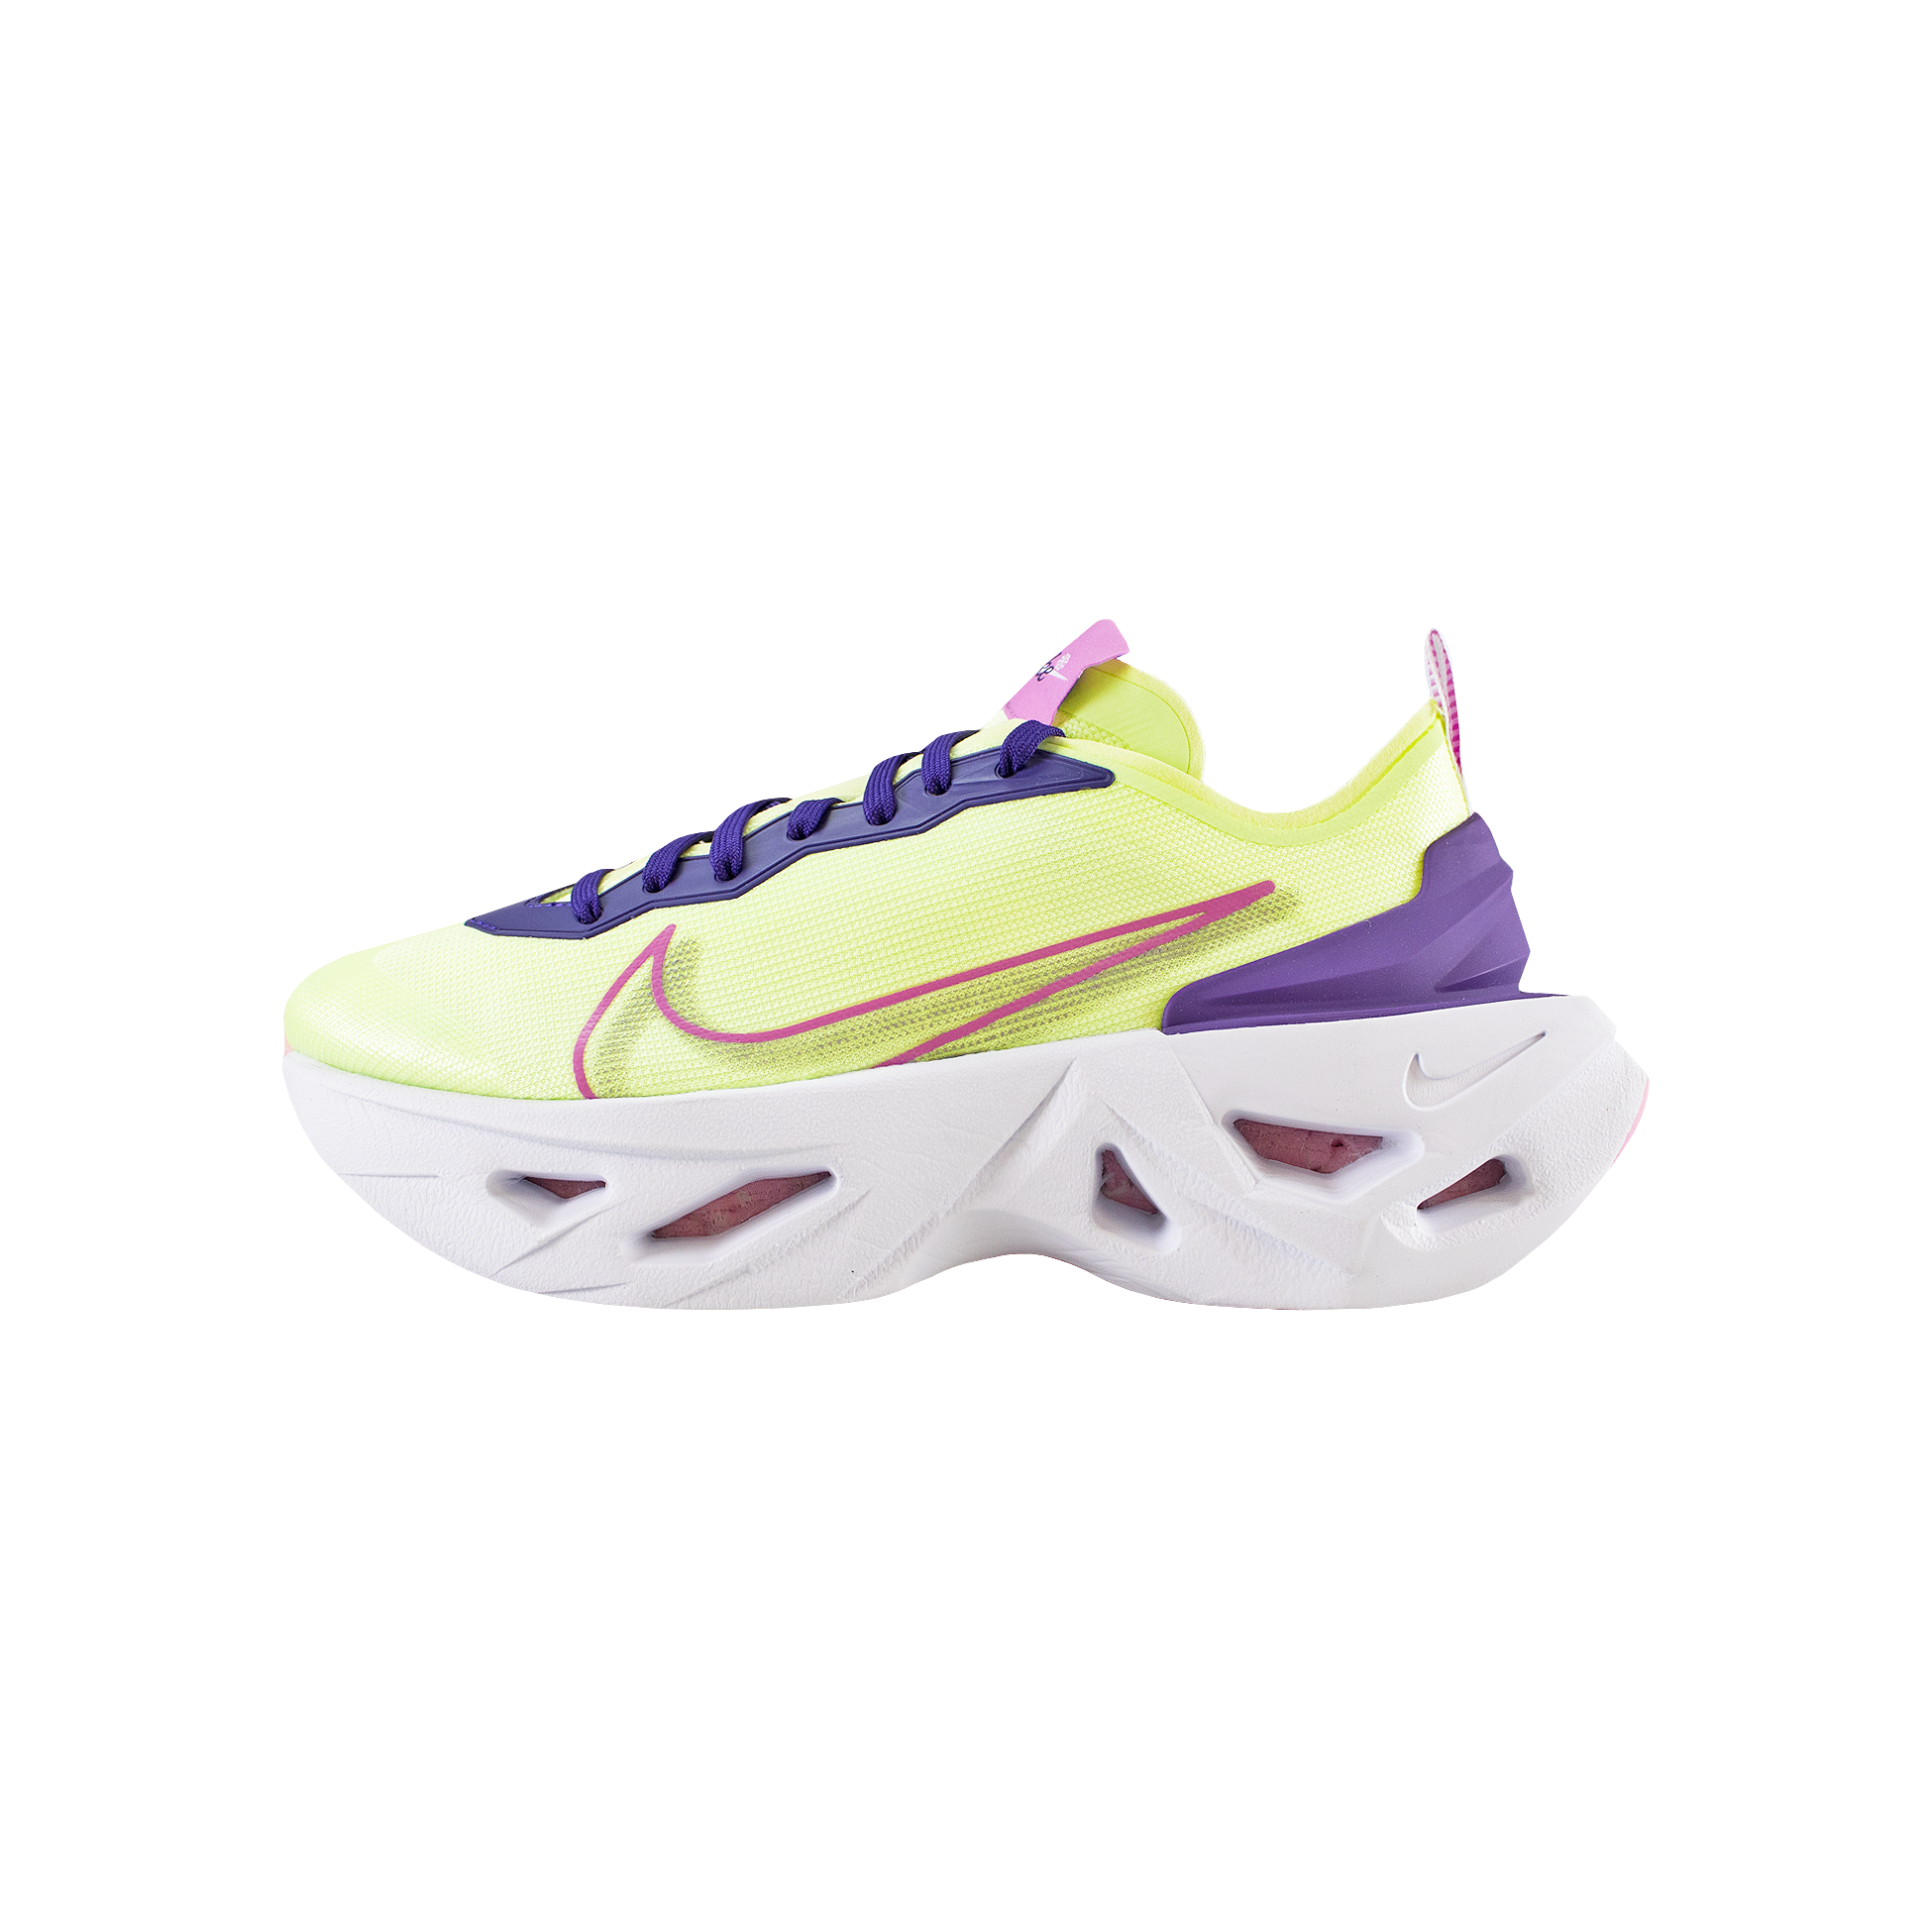 espacio Descongelar, descongelar, descongelar heladas Contribuyente W Nike Zoom X Vista Grind 'Barely Volt/Eggplant' [CT8919-700] | ROOTED